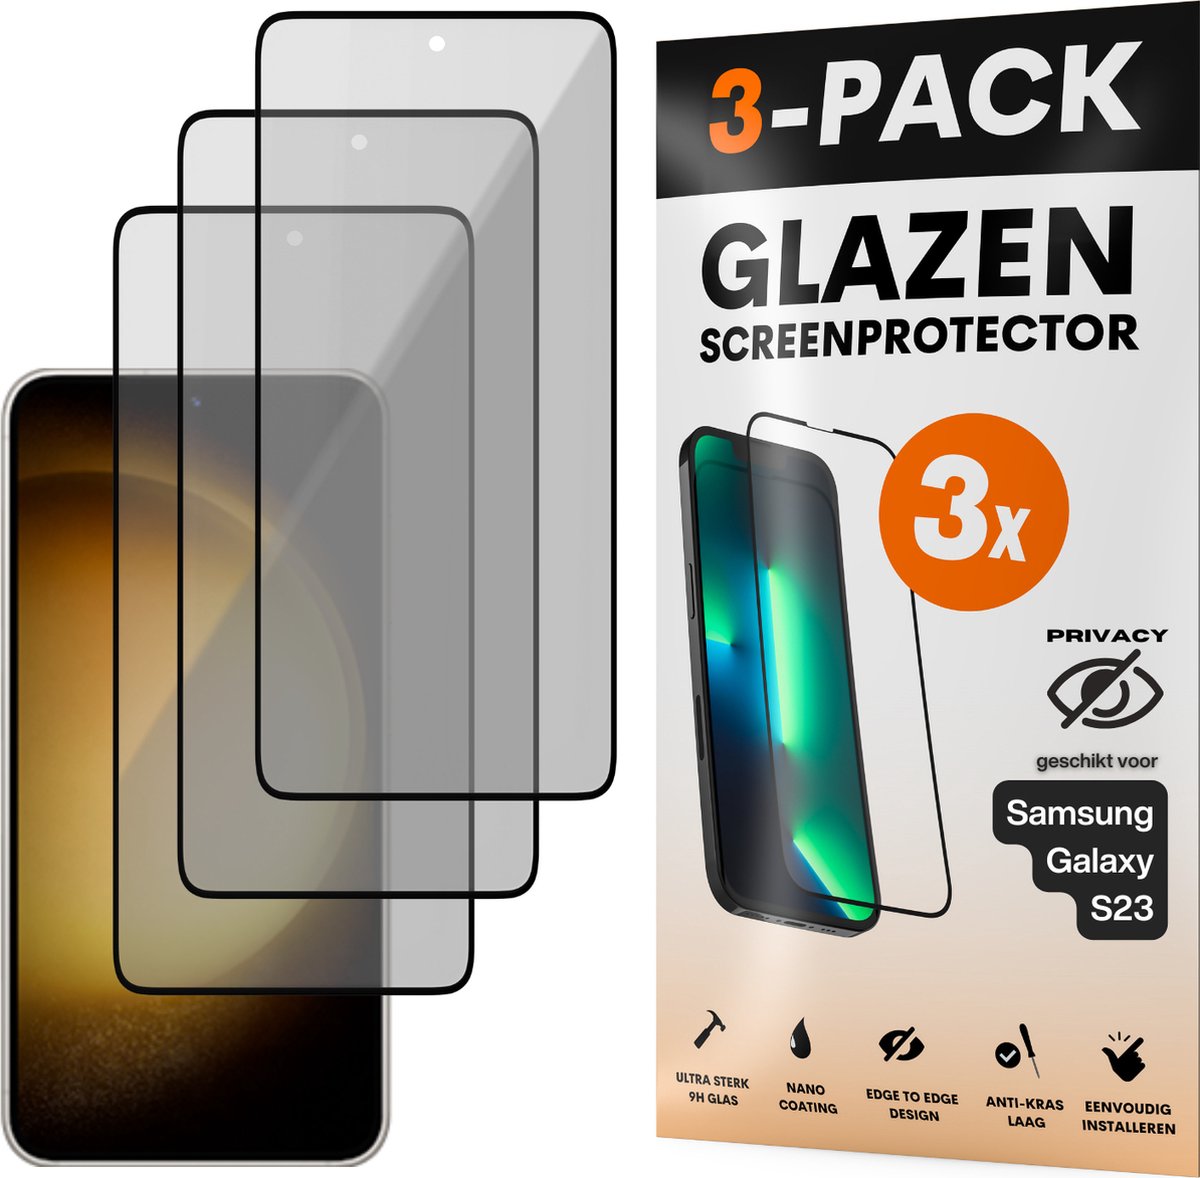 Privacy Screenprotector - Geschikt voor Samsung Galaxy S23 - Gehard Glas - Full Cover Tempered Privacy Glass - Case Friendly - 3 Pack